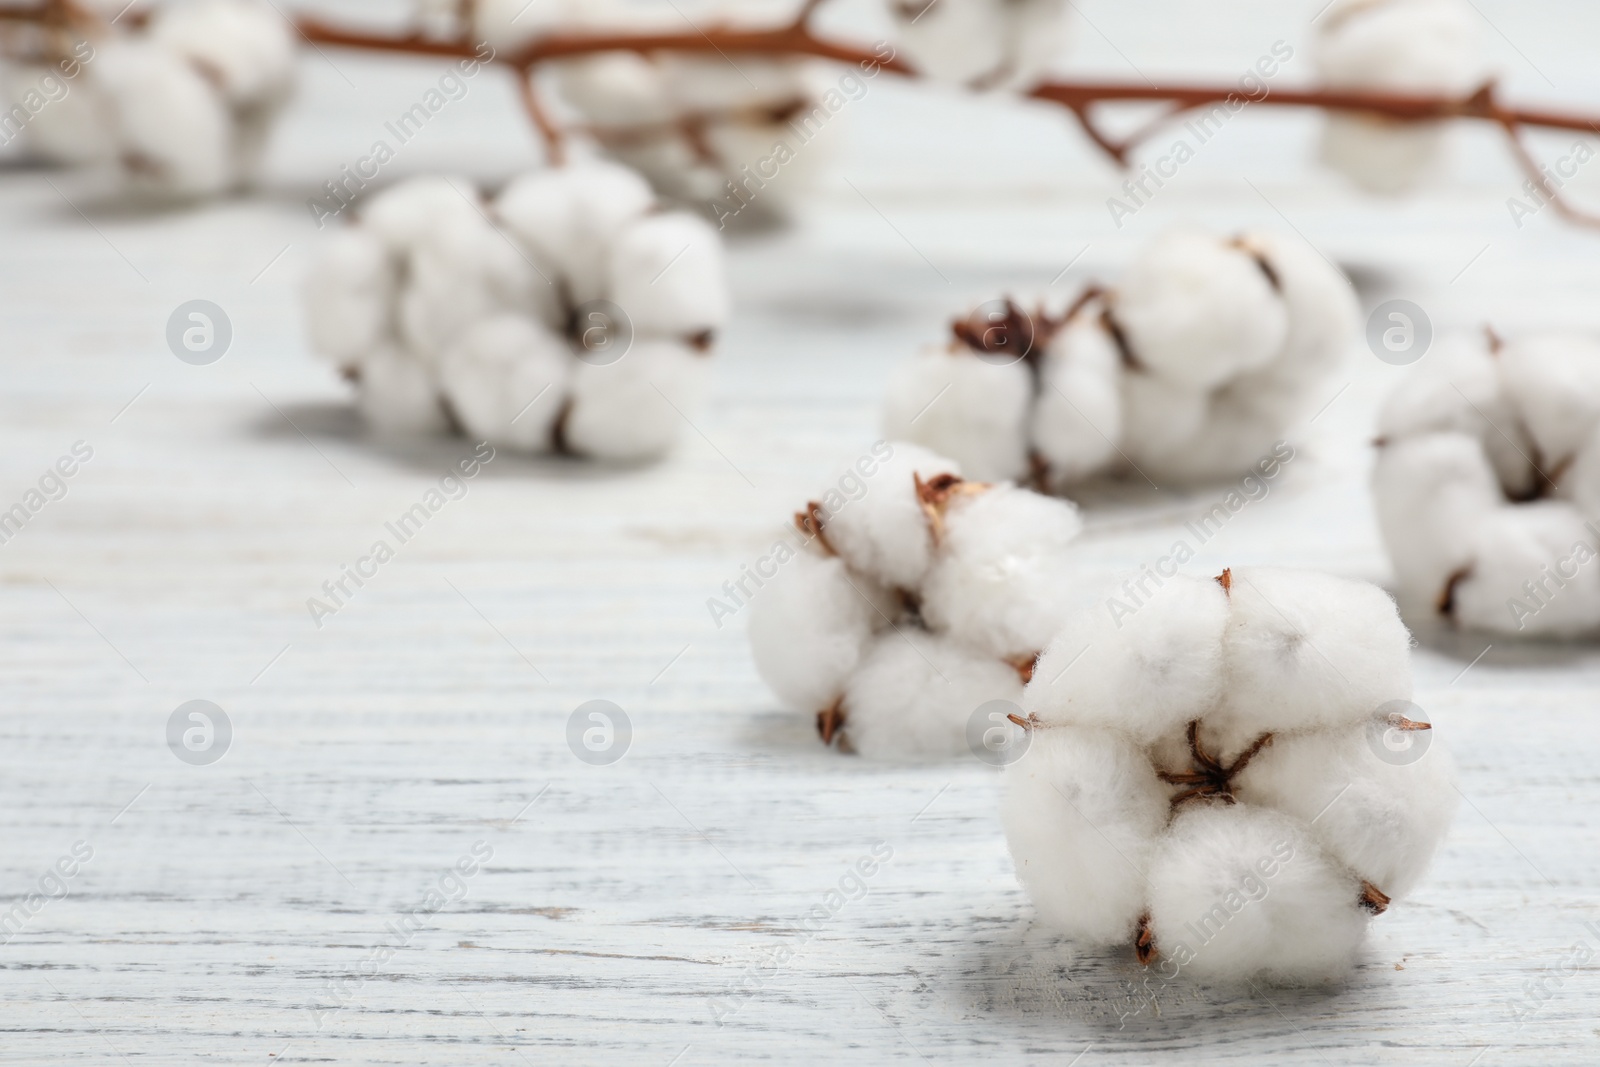 Photo of Fluffy cotton flowers on white wooden background, closeup